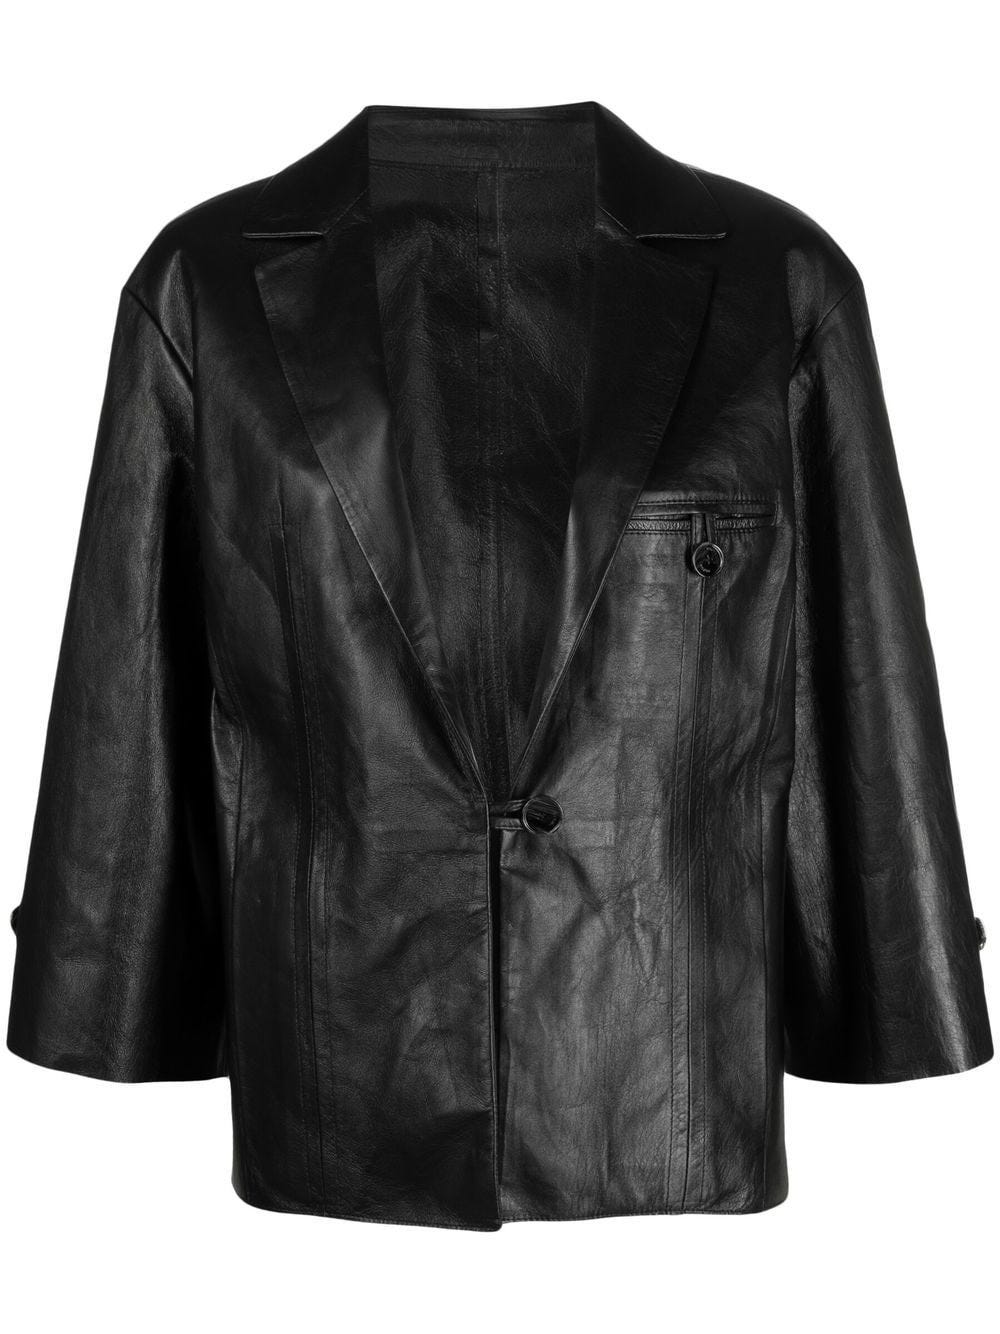 DROME BLACK LEATHER JACKET WITH CROP SLEEVES